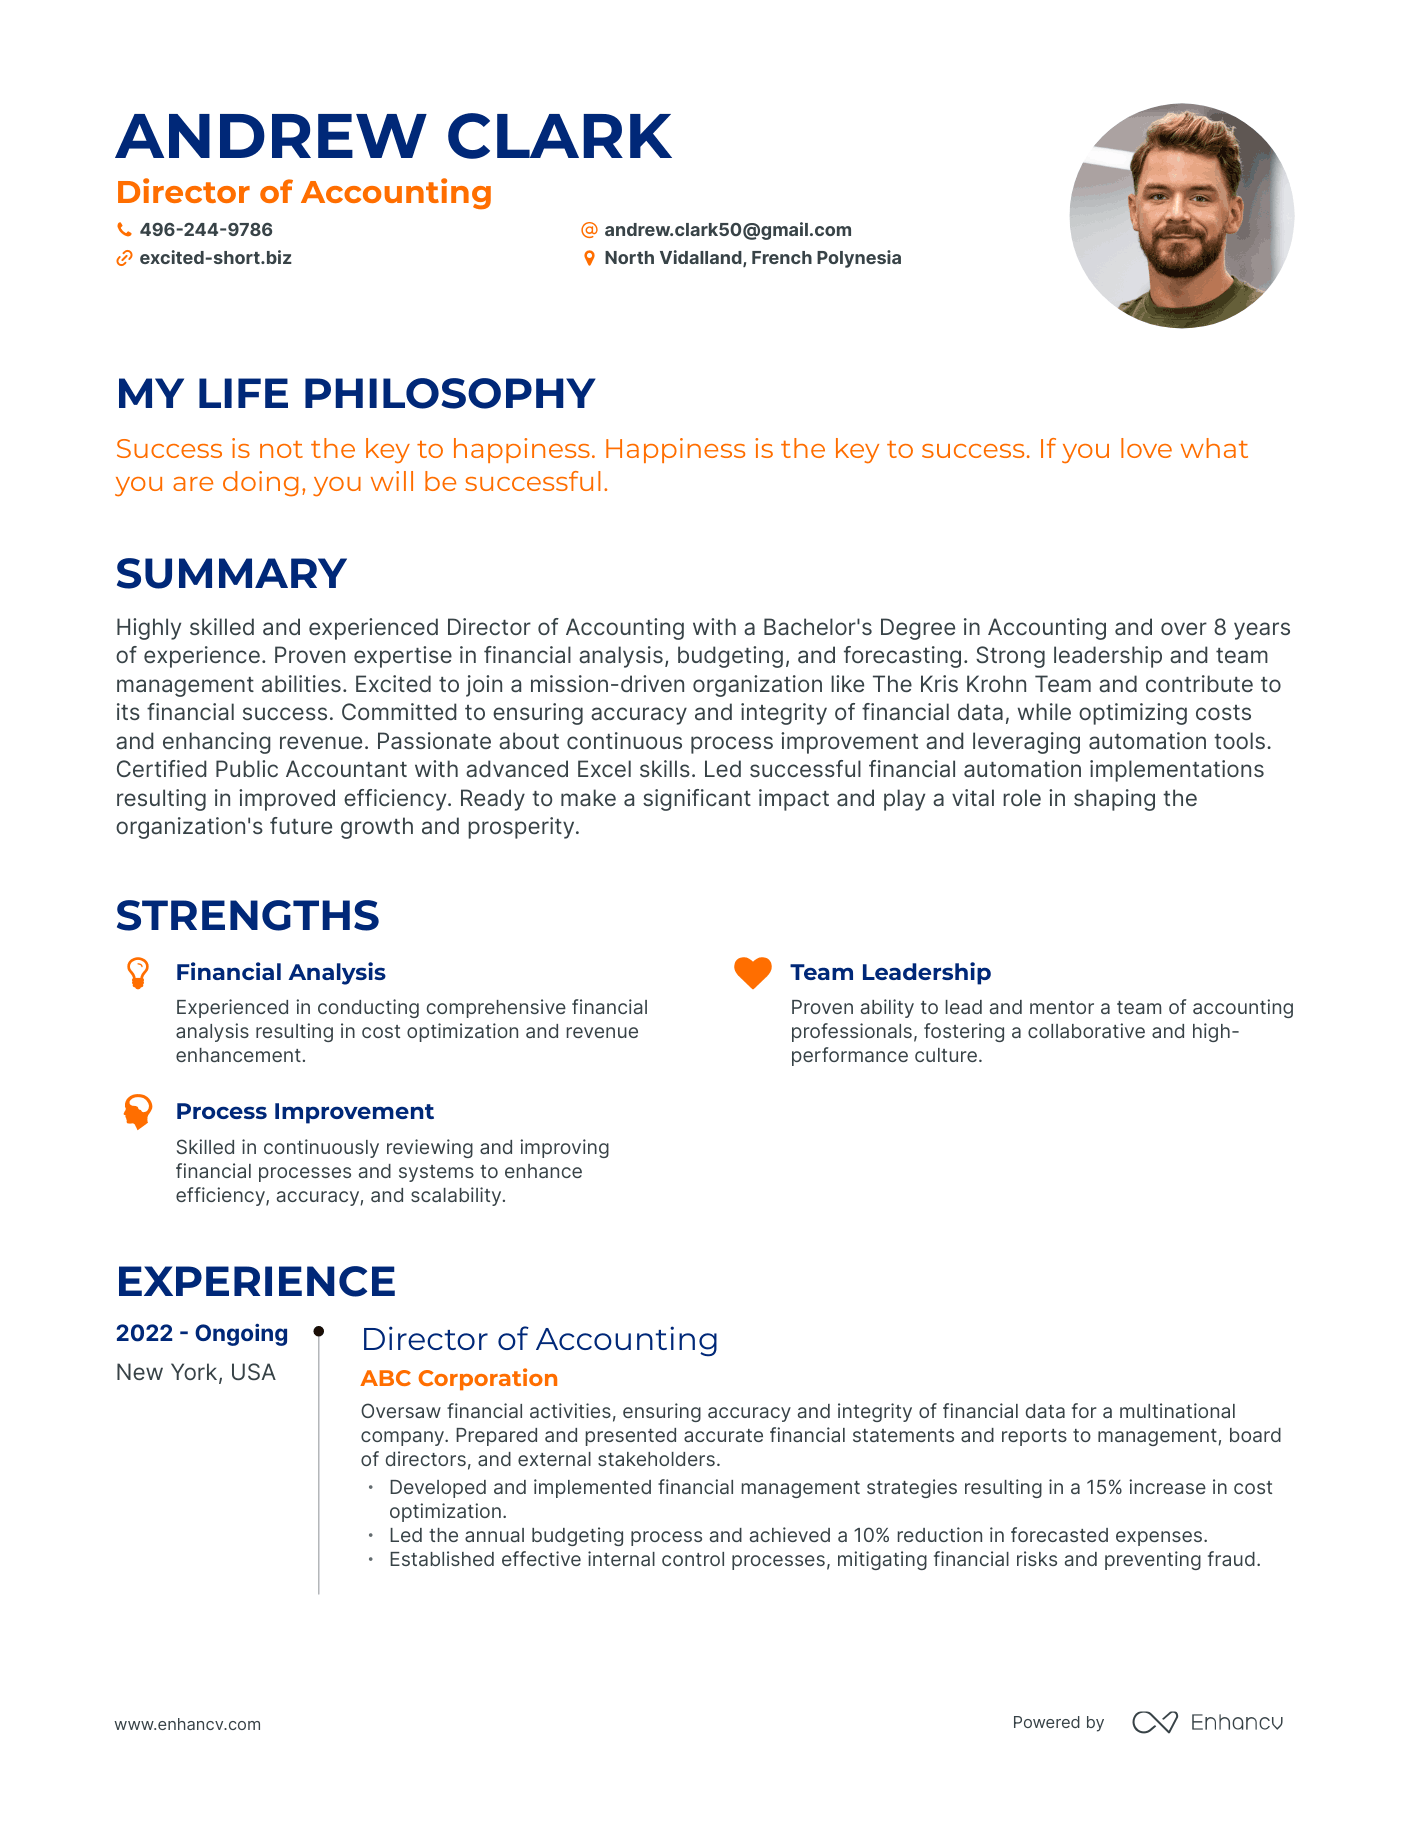 Creative Director of Accounting Resume Example